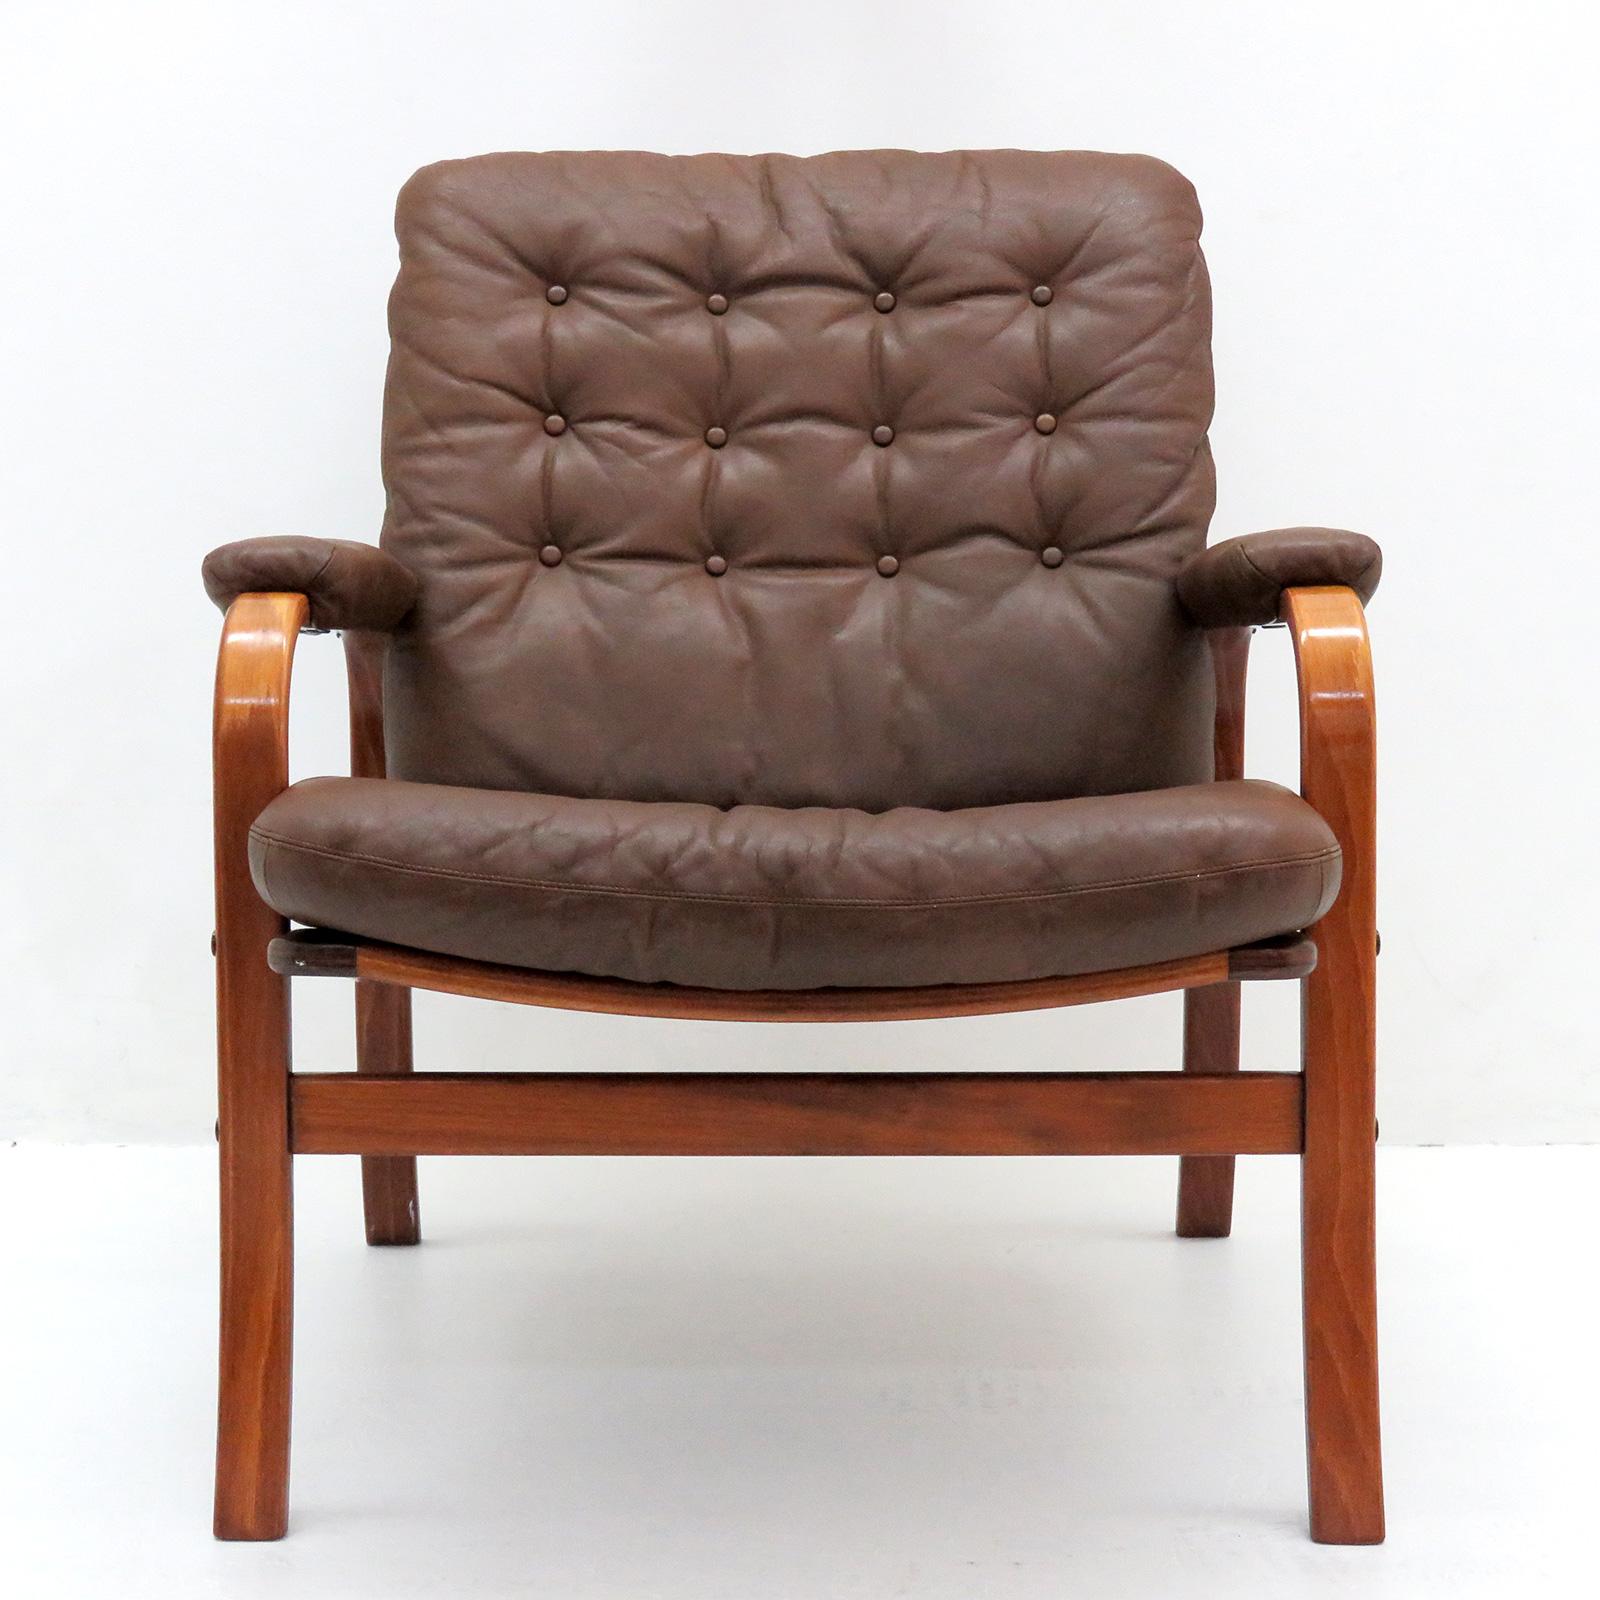 Striking 1950s Swedish bentwood chairs by Göte Möbler Nässjö, with brown tufted leather cushions, great patina.